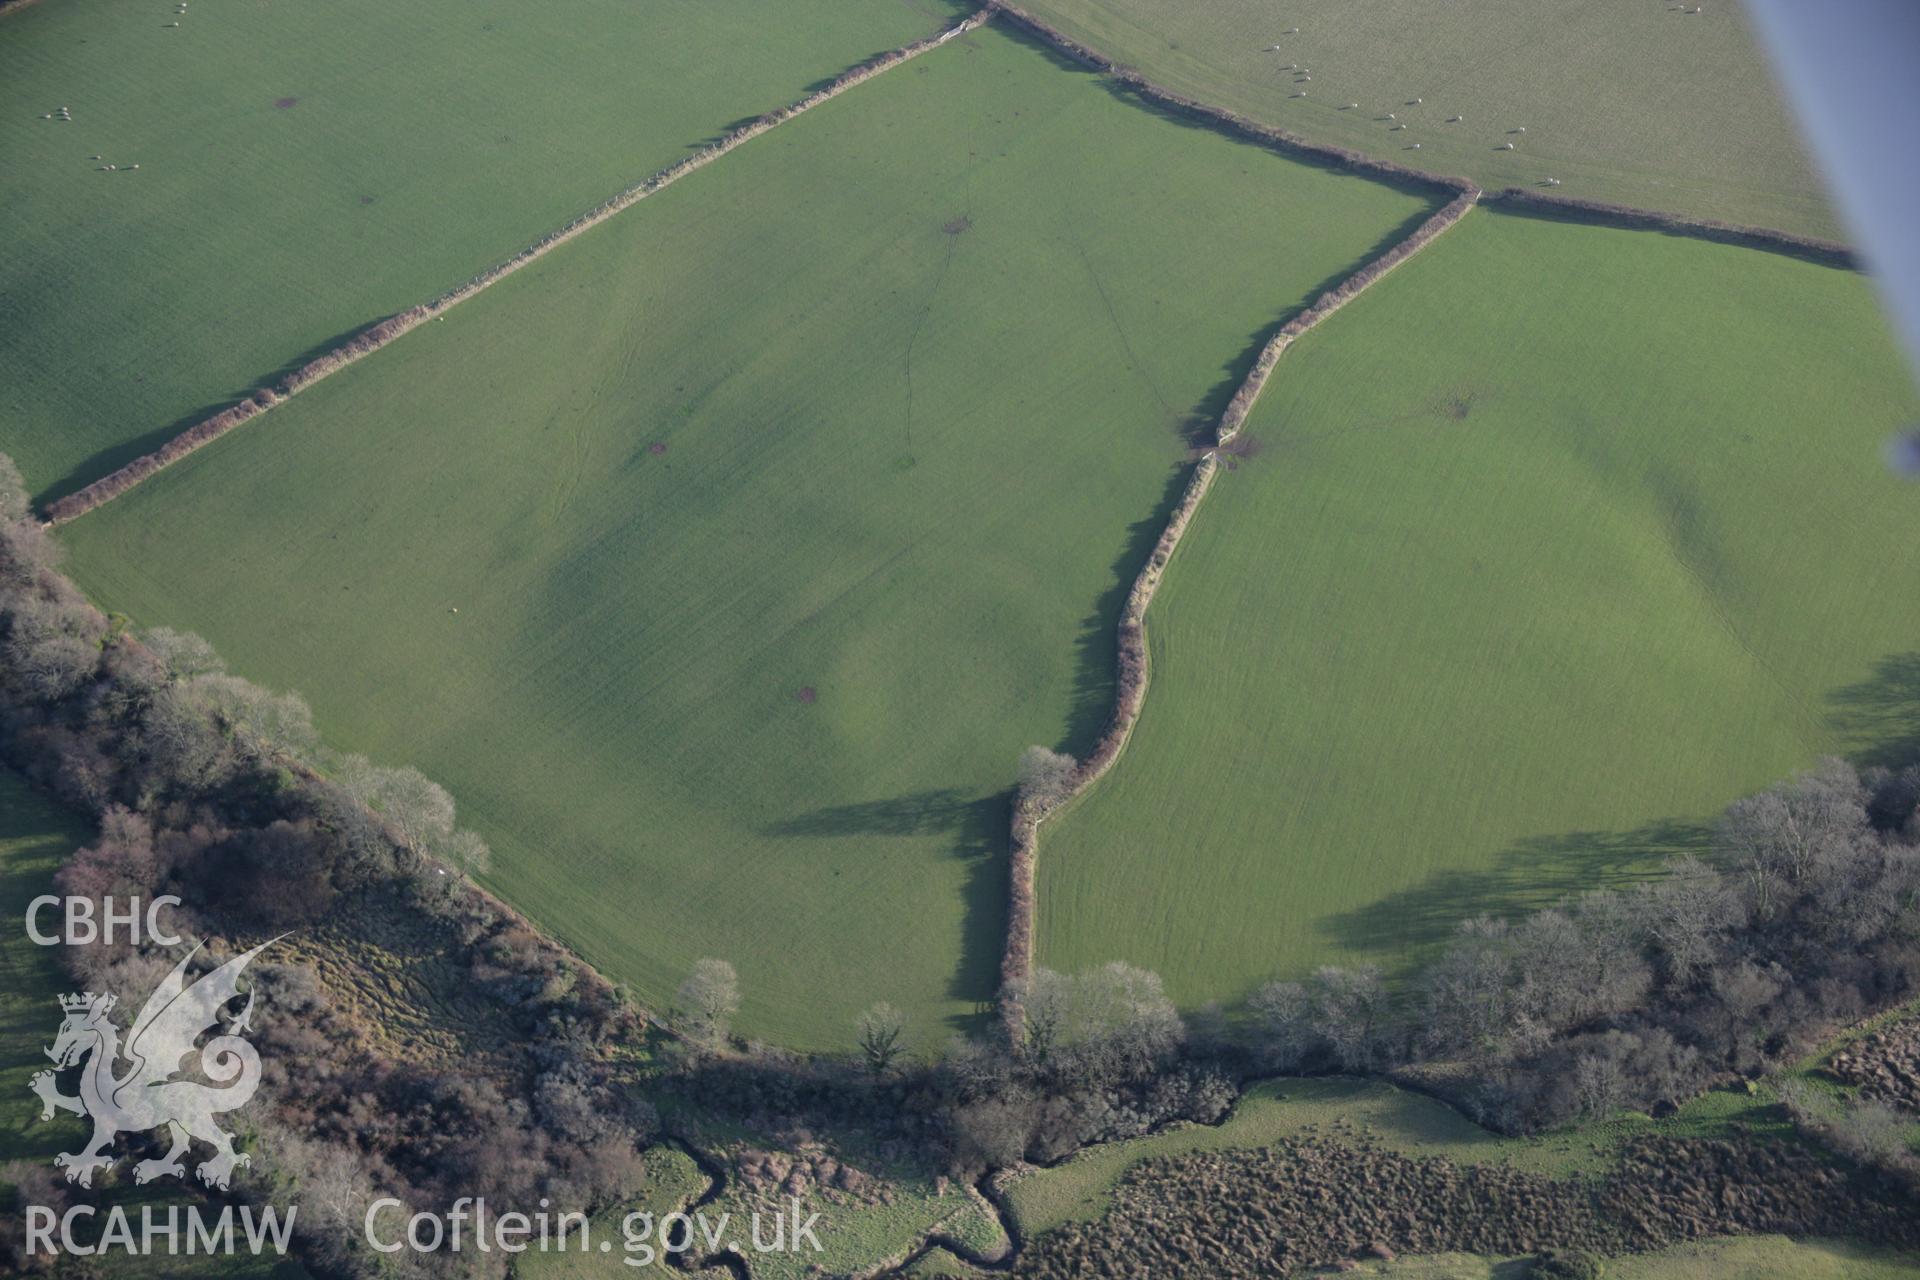 RCAHMW colour oblique aerial photograph of East Hook Rath (sometimes Walesland Rath) from the north-west. Taken on 11 January 2006 by Toby Driver.